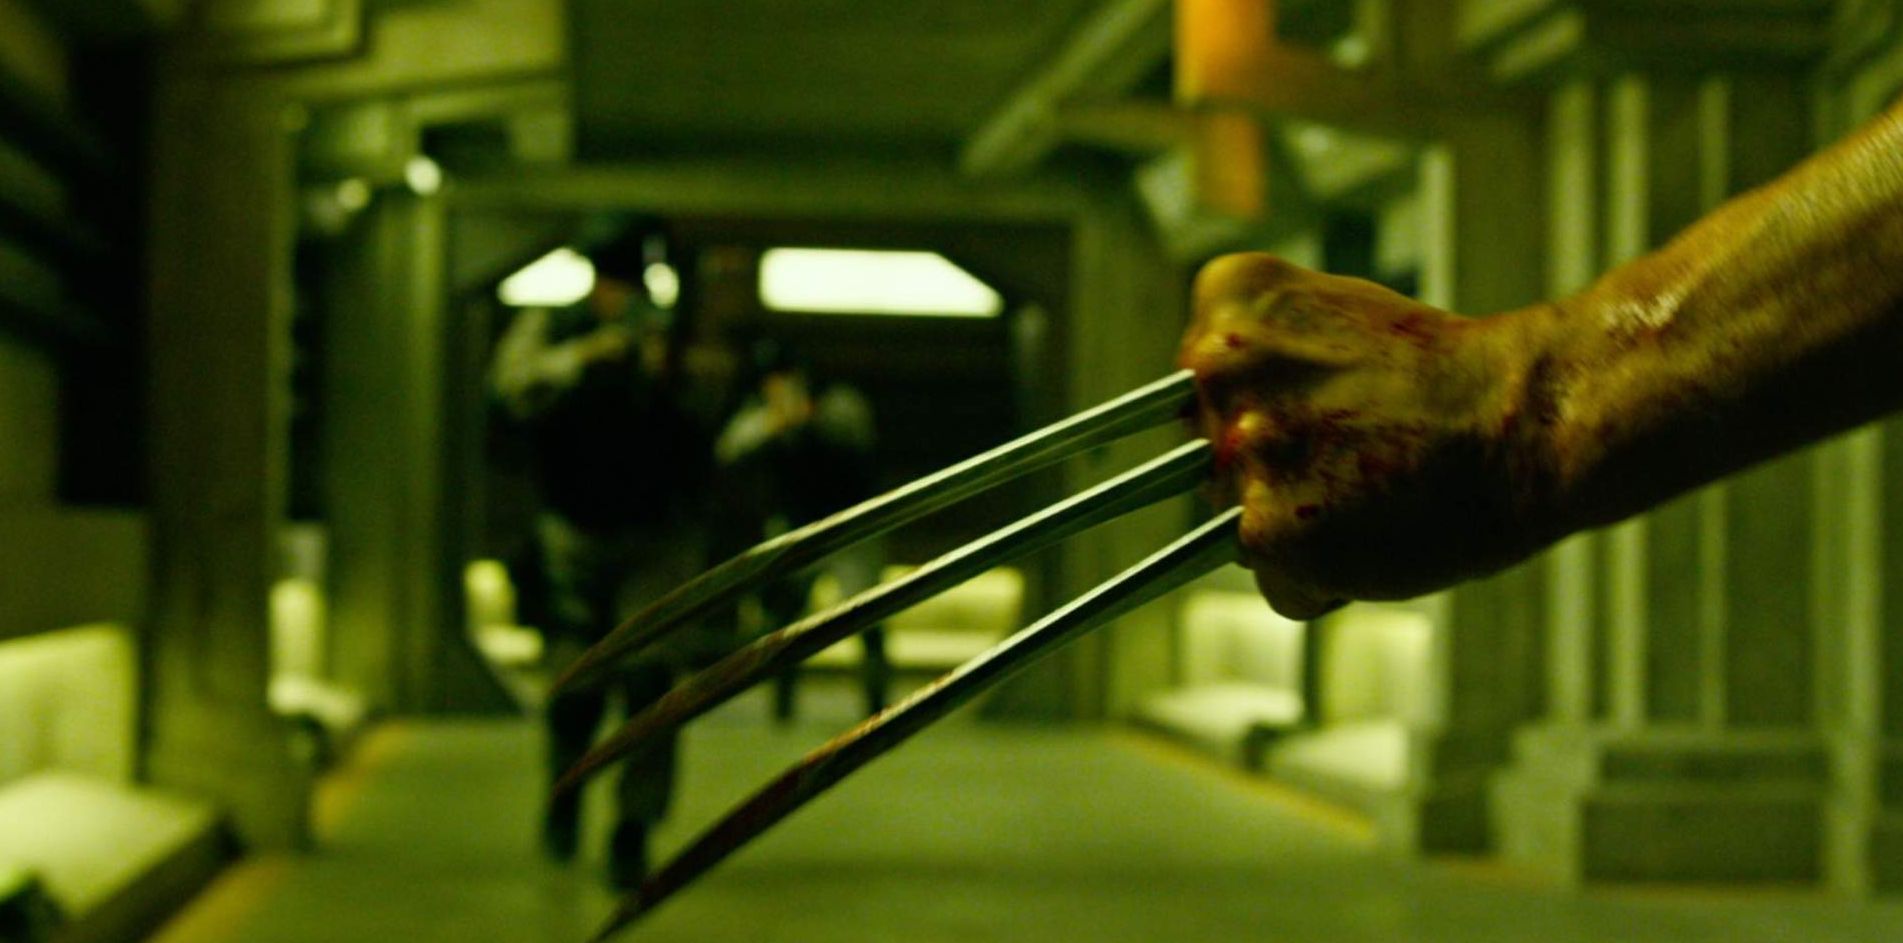 Wolverine makes an appearance in X-Men: Apocalypse